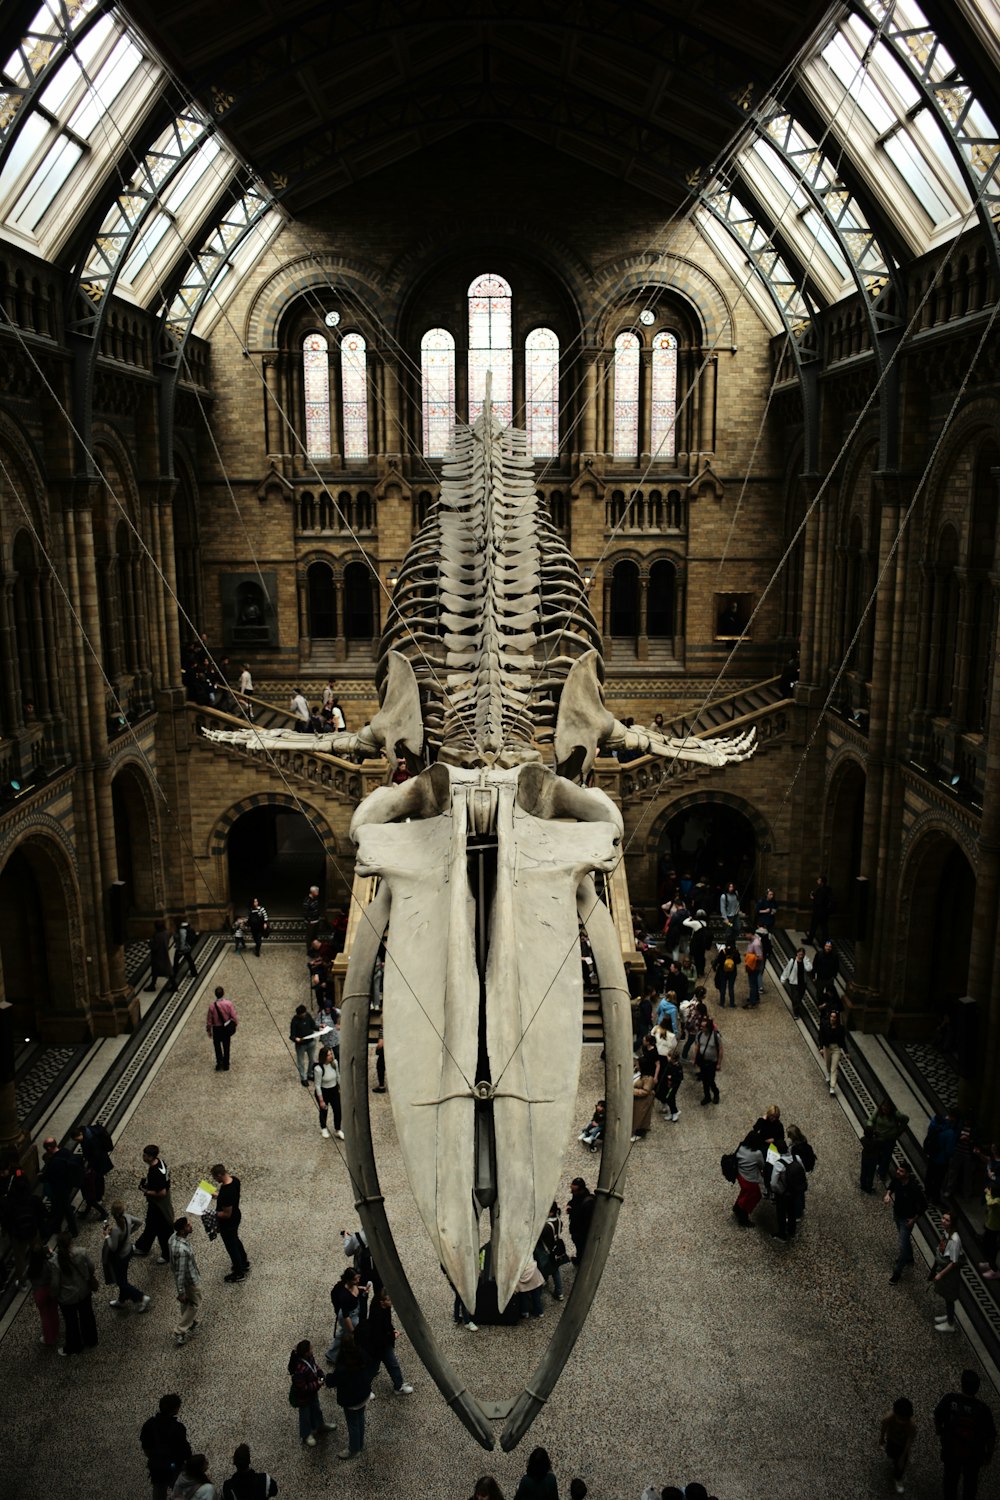 a large whale skeleton in a museum filled with people